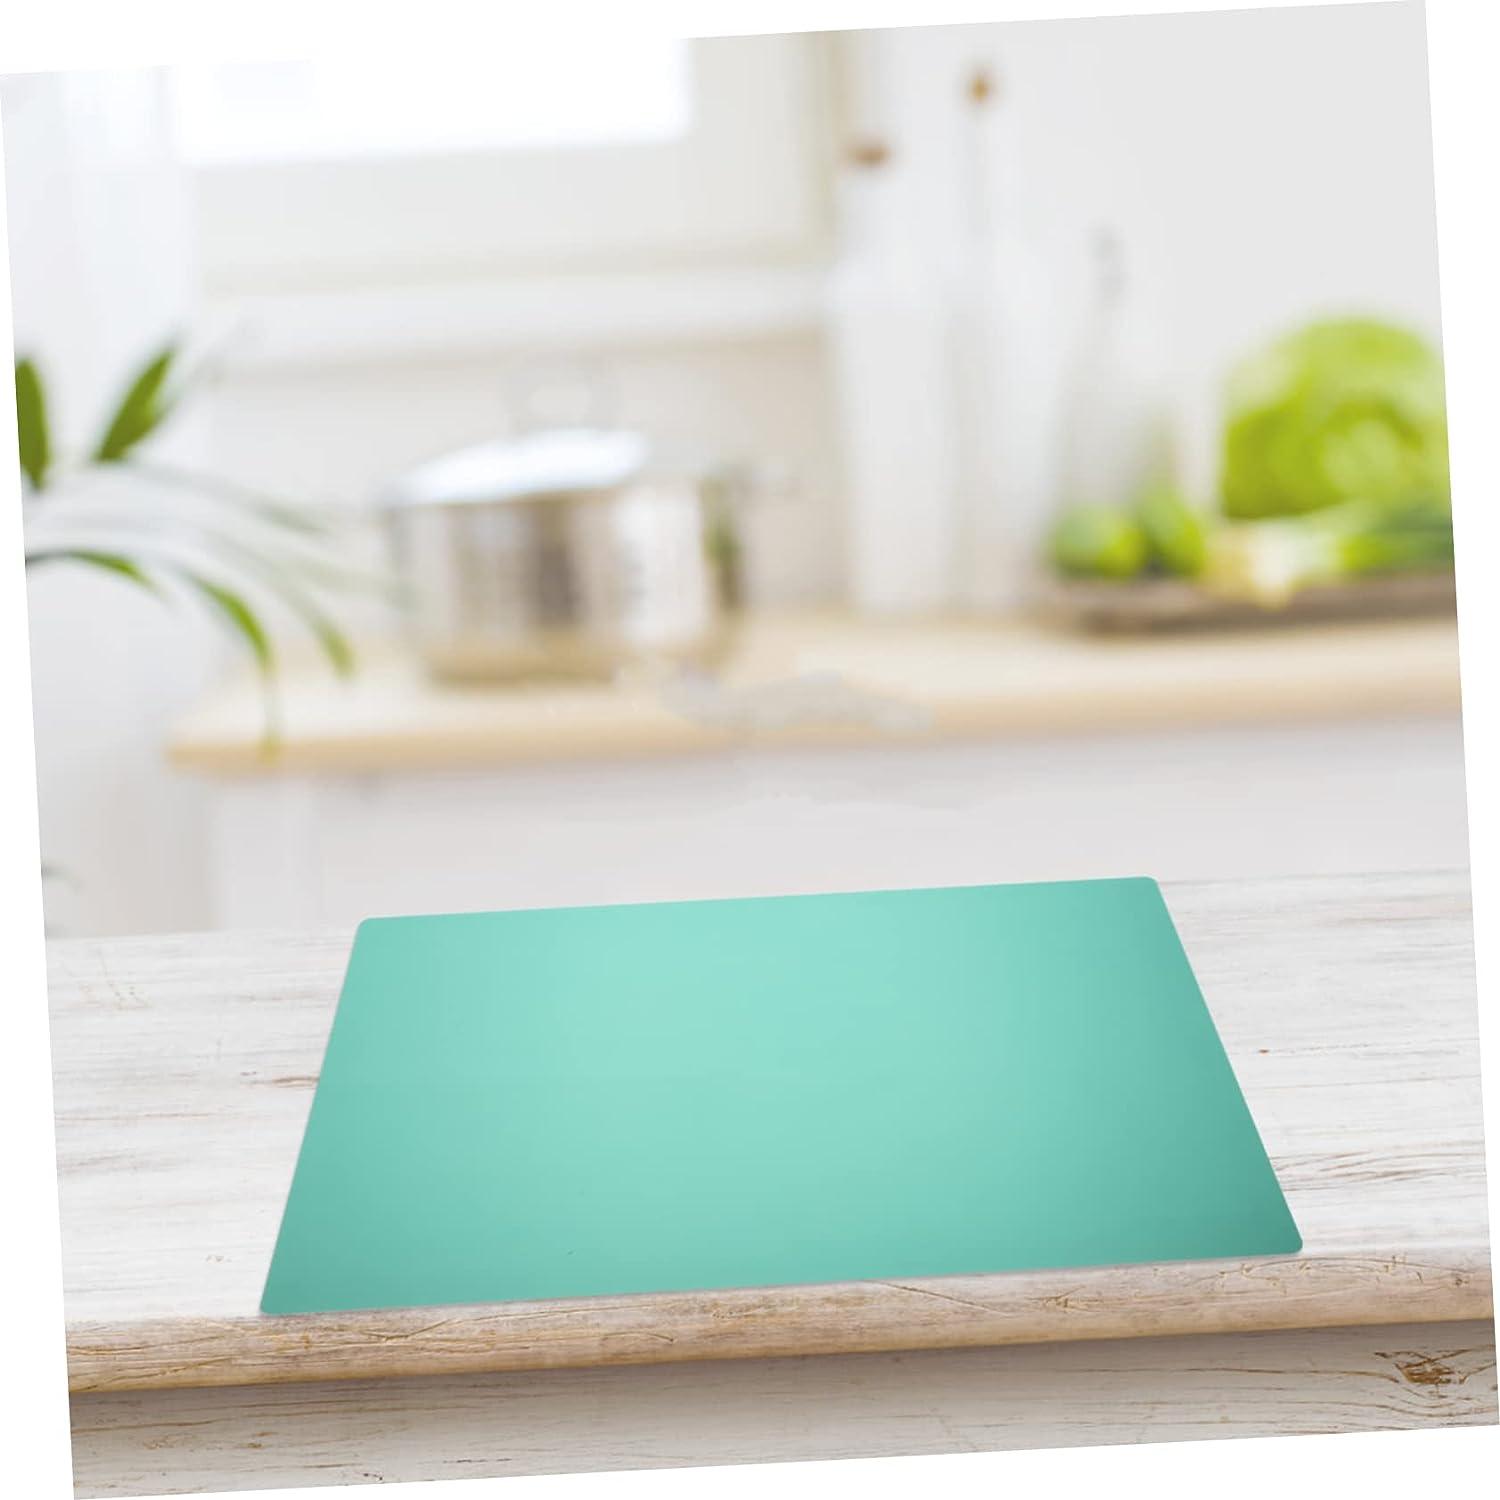 SEWACC DIY Silicone Mat Square Placemats Large Silicone Mat